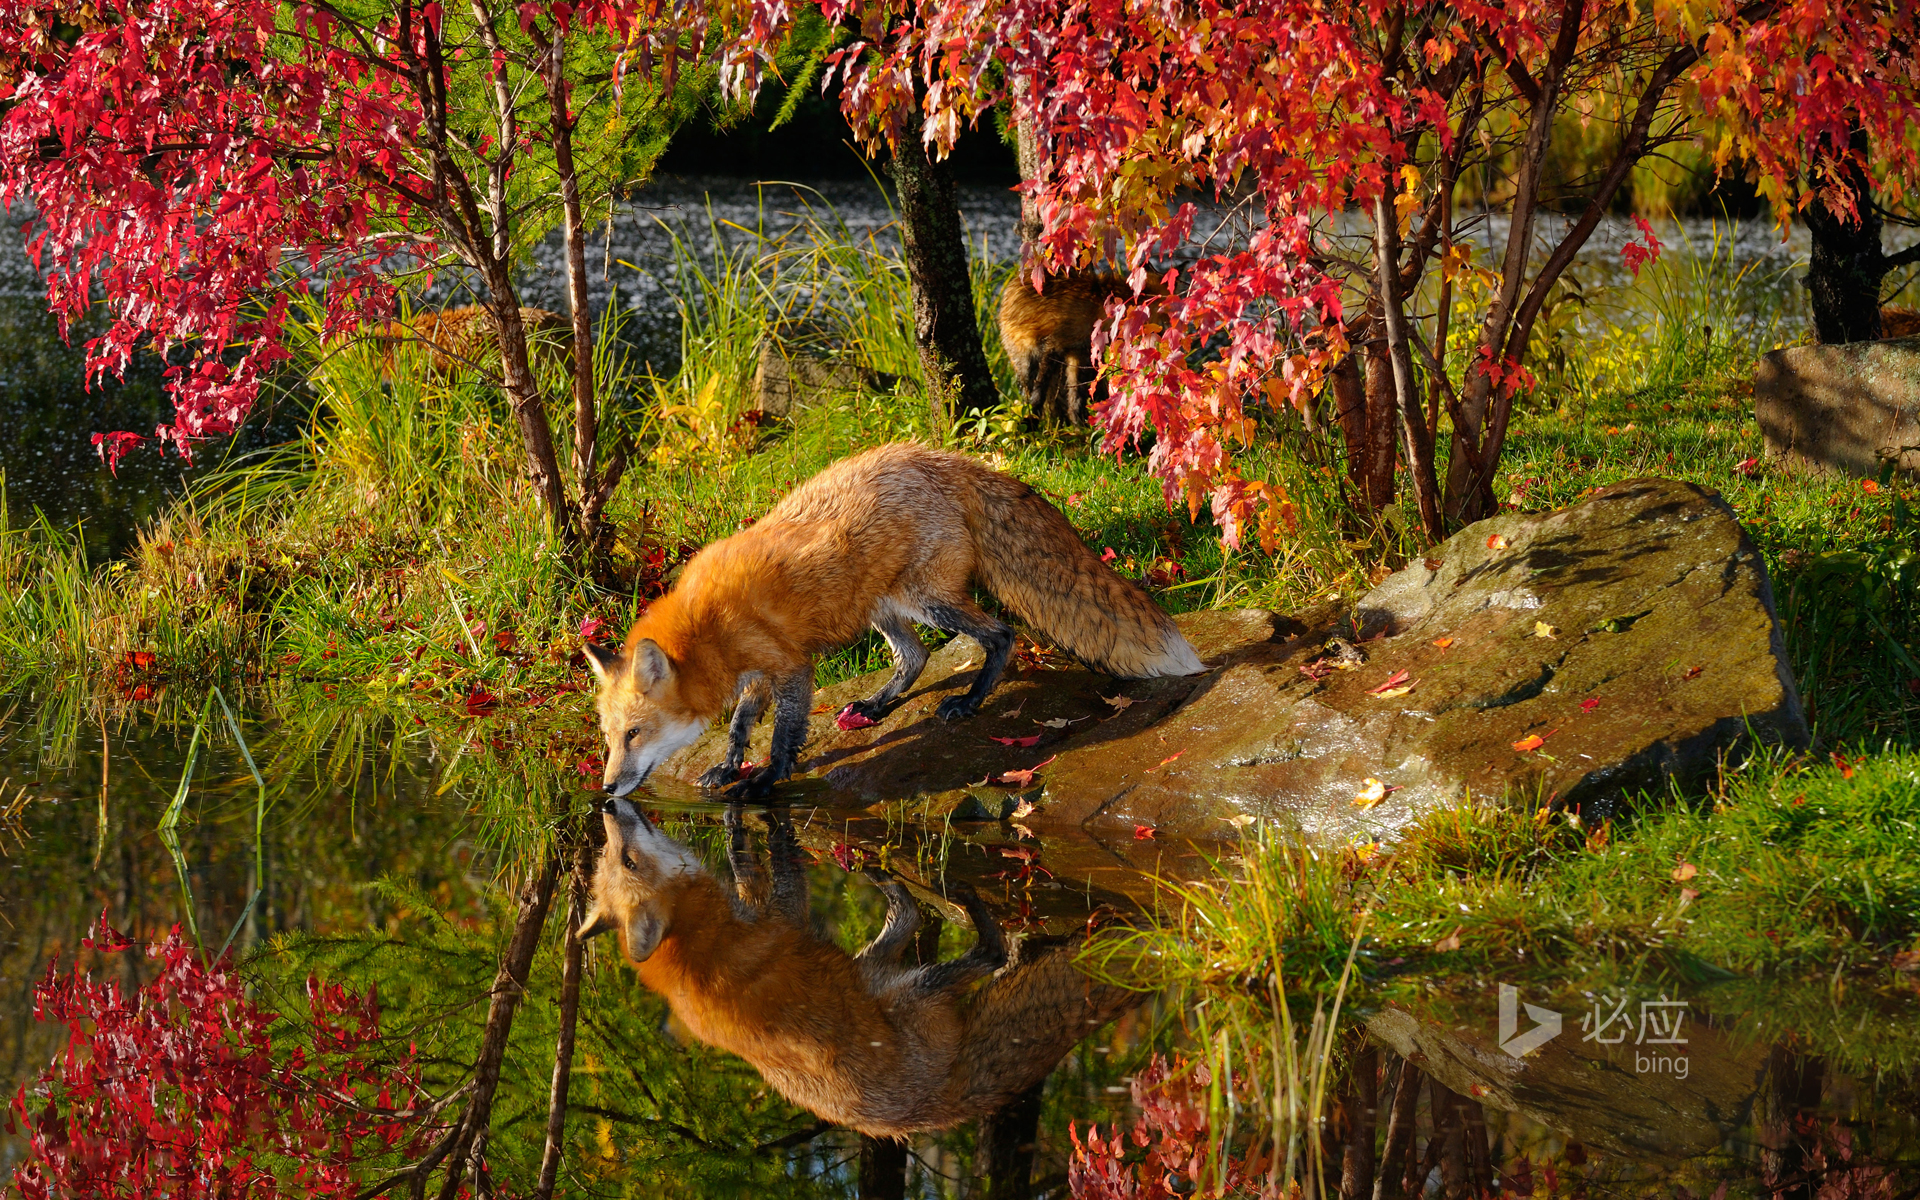 Red fox drinking water and reflection by river near maple tree in autumn morning